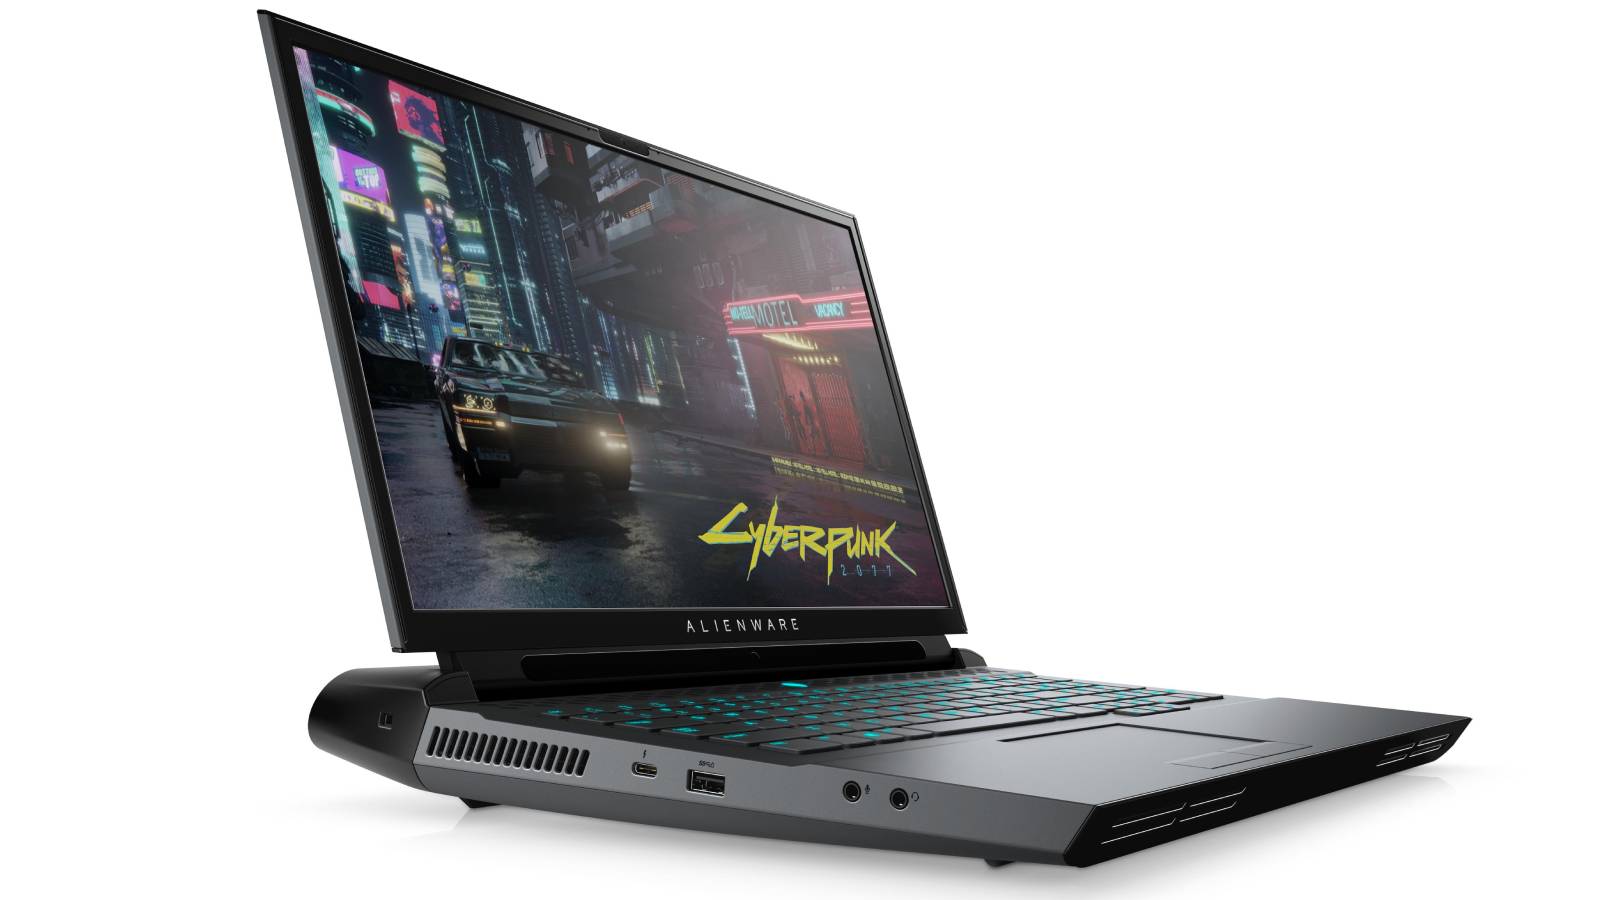 Alienware’s new lineup includes ‘the world’s most powerful gaming